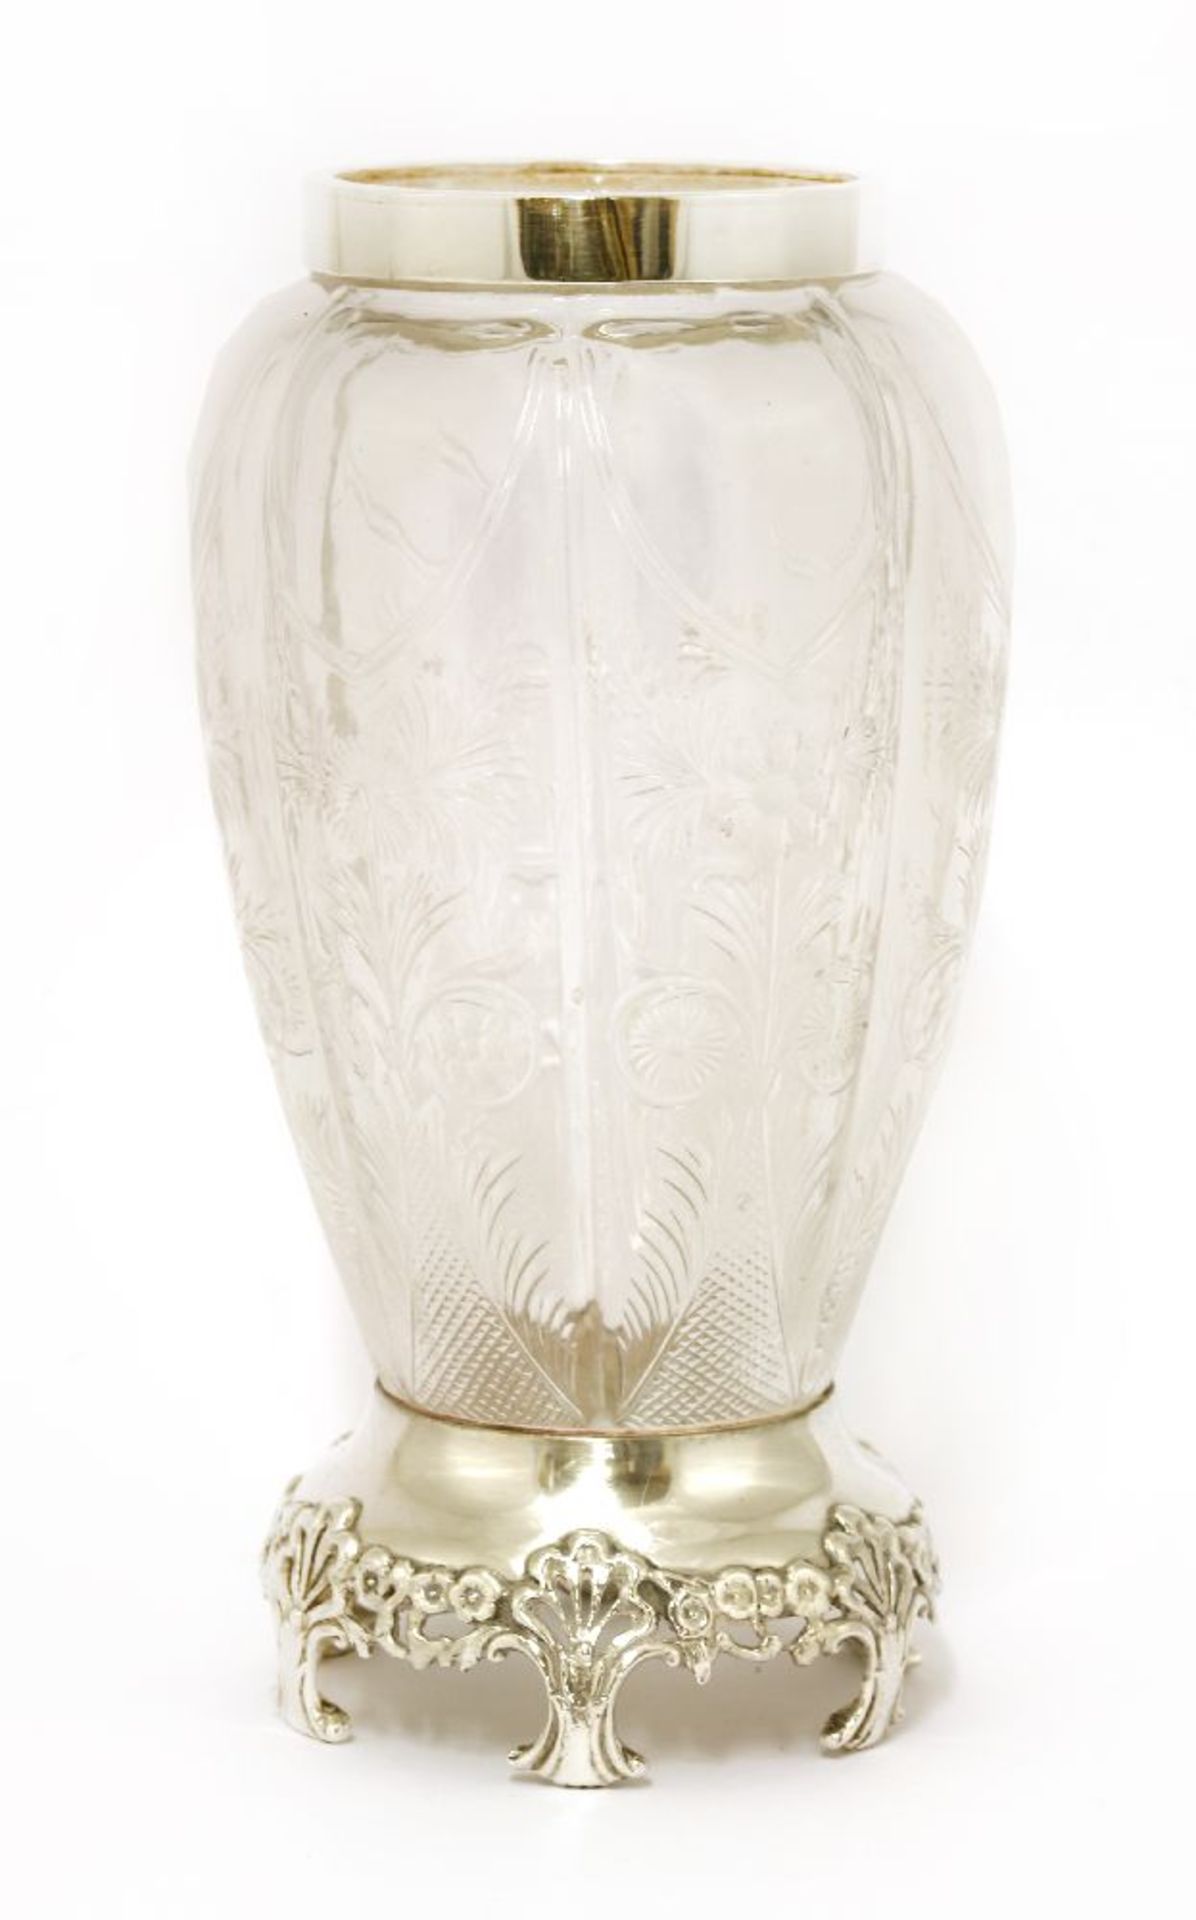 An Edwardian silver-mounted 'rock crystal' glass vase,by William Comyns, London, 1901,carved in